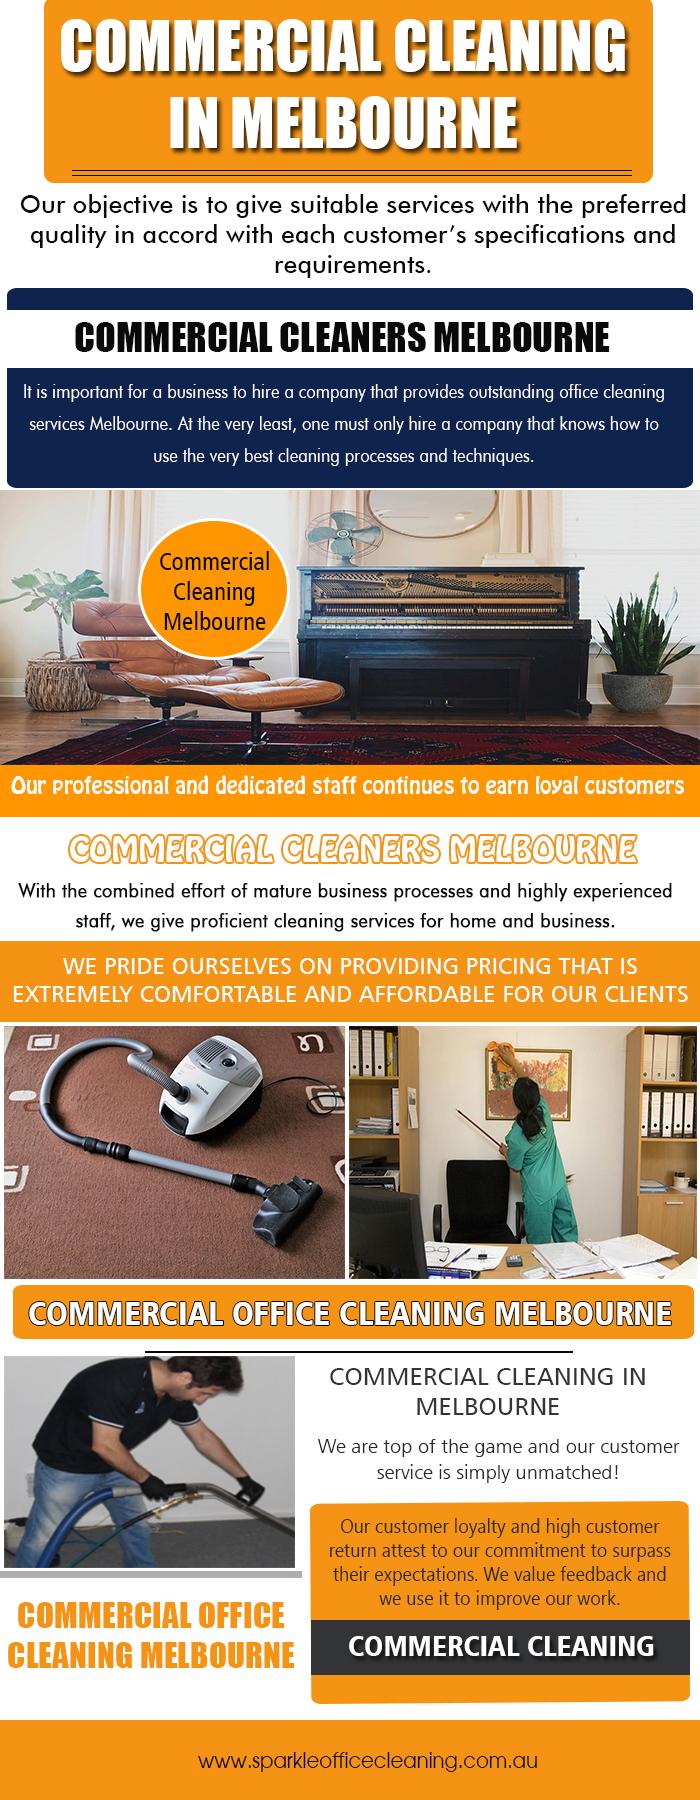 Commercial Cleaning in Melbourne | sparkleofficecleaning.com.au